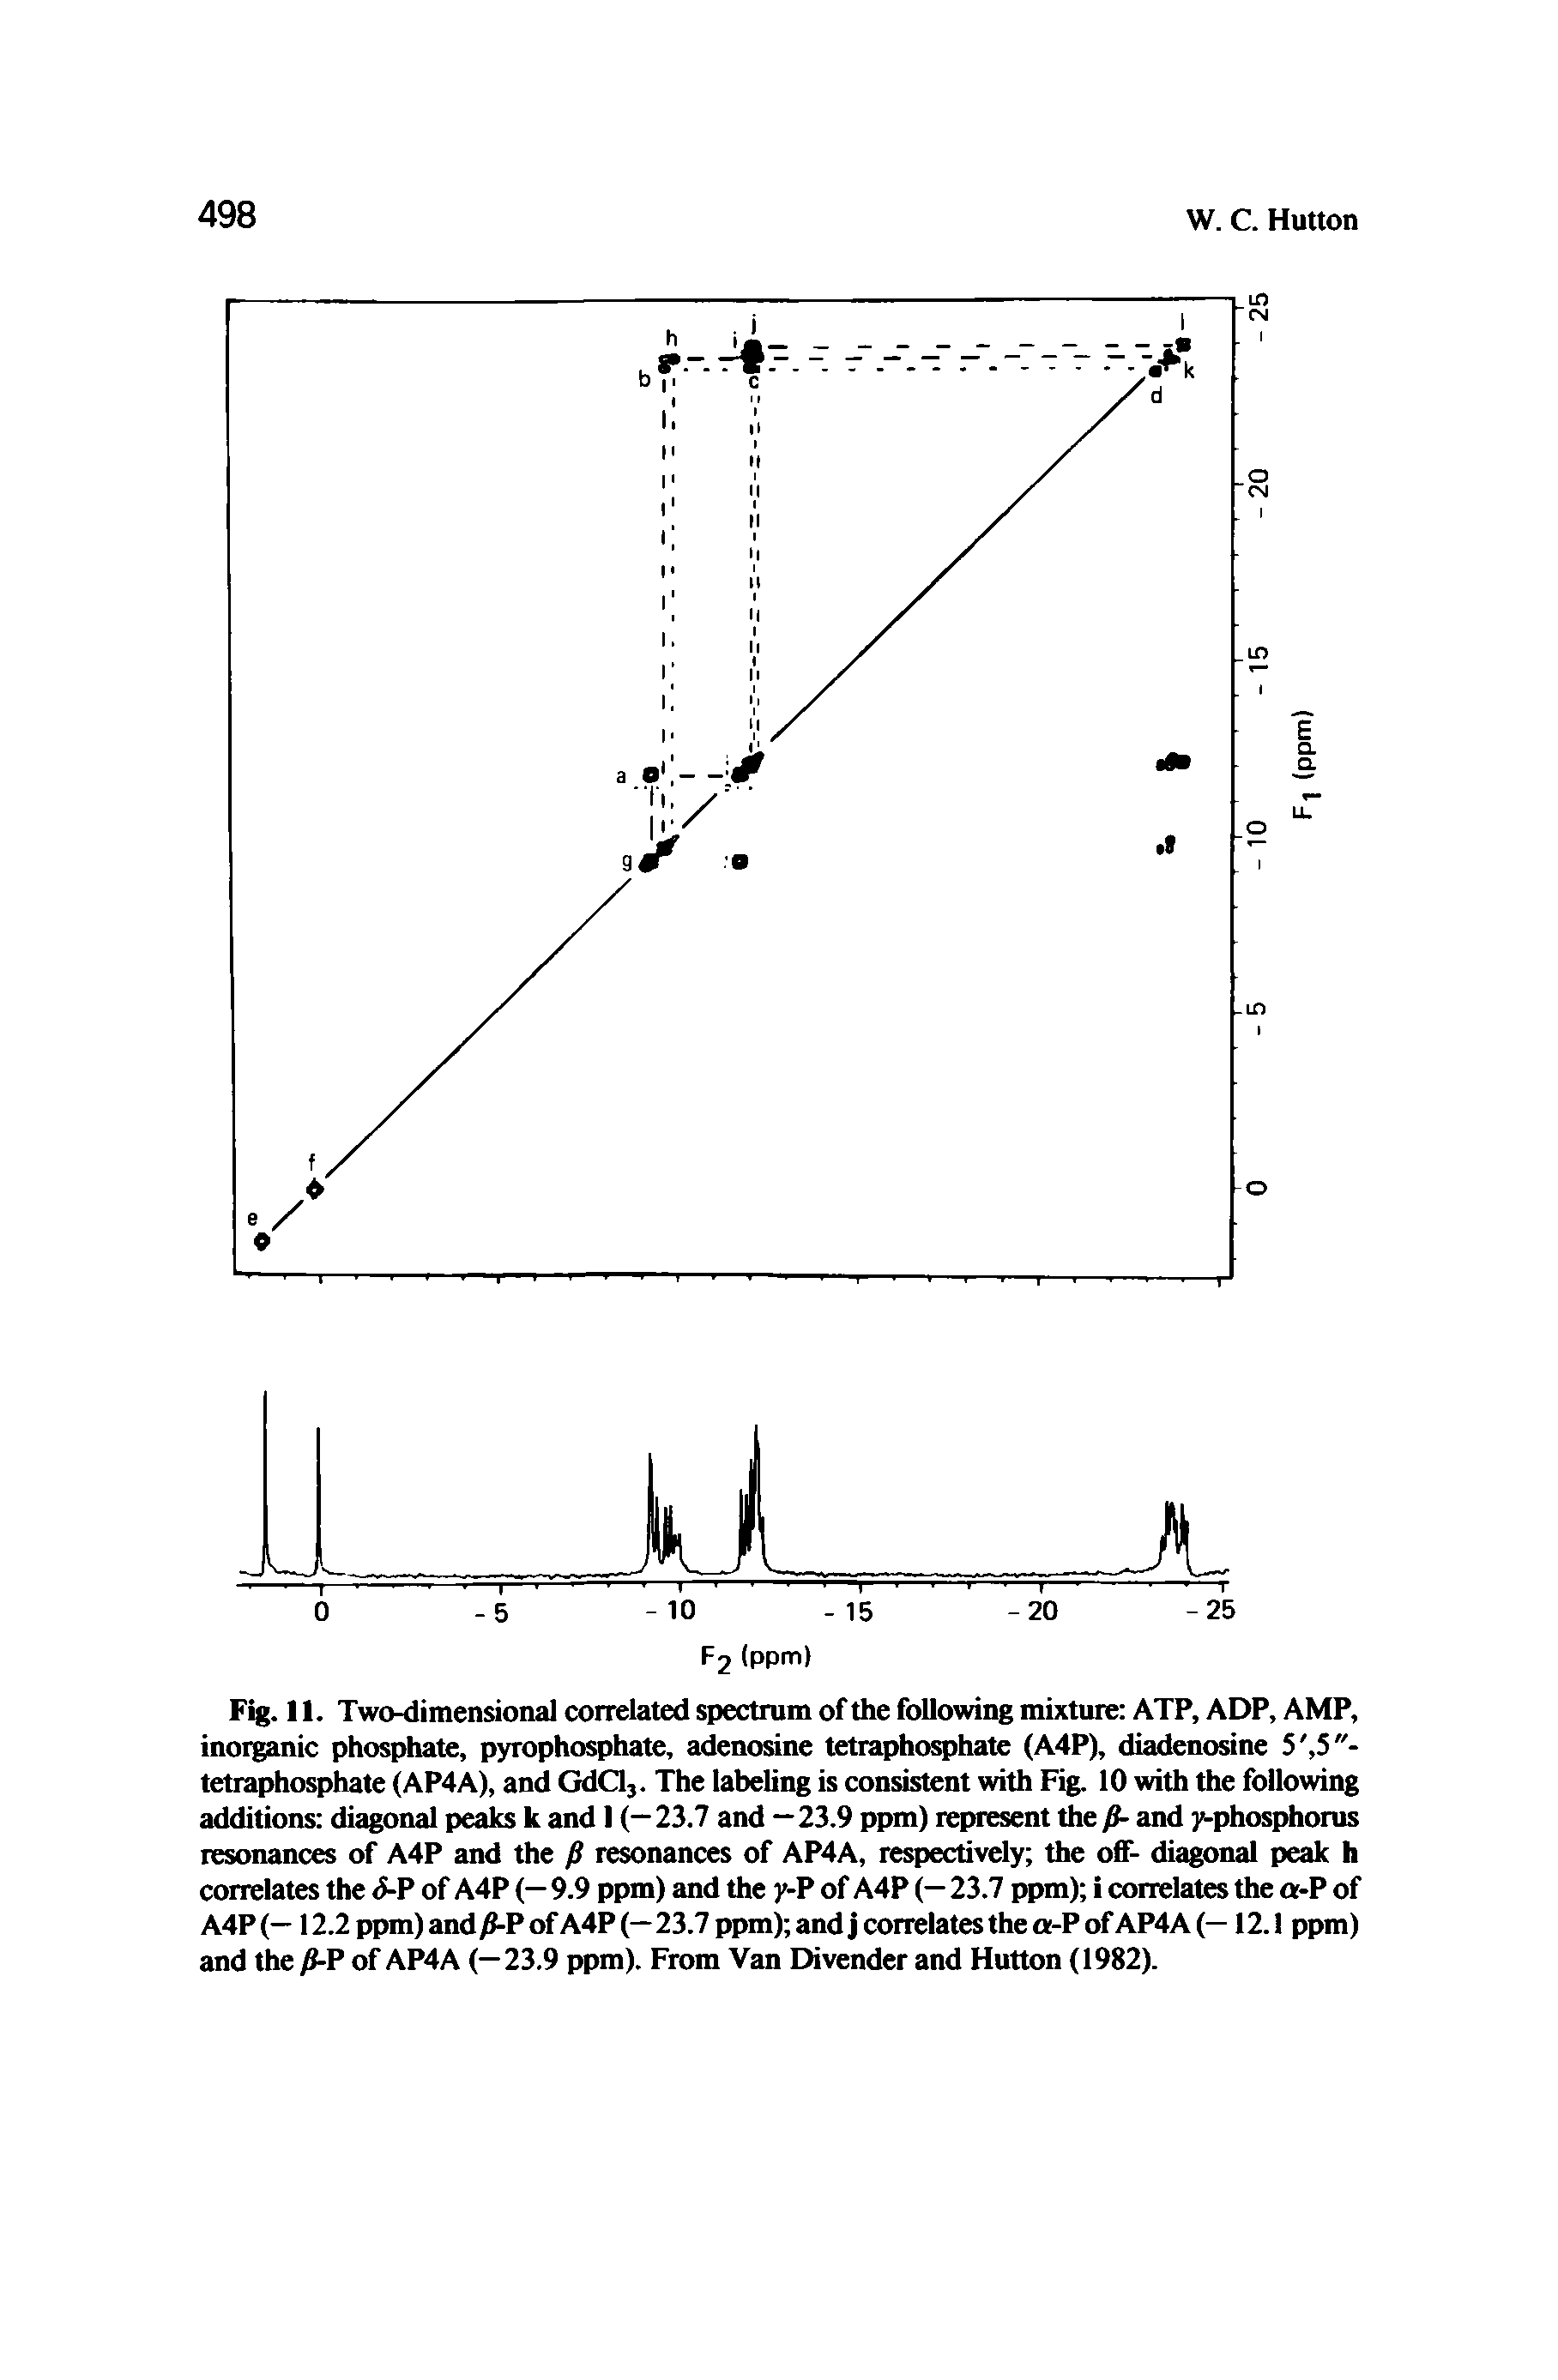 Fig. 11. Two-dimensional correlated spectrum of the following mixture ATP, ADP, AMP, inorganic phosphate, pyrophosphate, adenosine tetraphosphate (A4P), diadenosine 5, S"-tetraphosphate (AP4A), and GdCl,. The labeling is consistent with Fig. 10 with the following additions diagonal peaks k and 1 (—23.7 and —23.9 ppm) represent the P- and y-phosphorus resonances of A4P and the p resonances of AP4A, respectively the off- diagonal peak h correlates the <J-P of A4P (— 9.9 ppm) and the y-P of A4P (— 23.7 ppm) i correlates the a-P of A4P (— 12.2 ppm) and P of A4P (—23.7 ppm) and j correlates the a-P of AP4A (—12.1 ppm) and the P-V of AP4A (—23.9 ppm). From Van Divender and Hutton (1982).